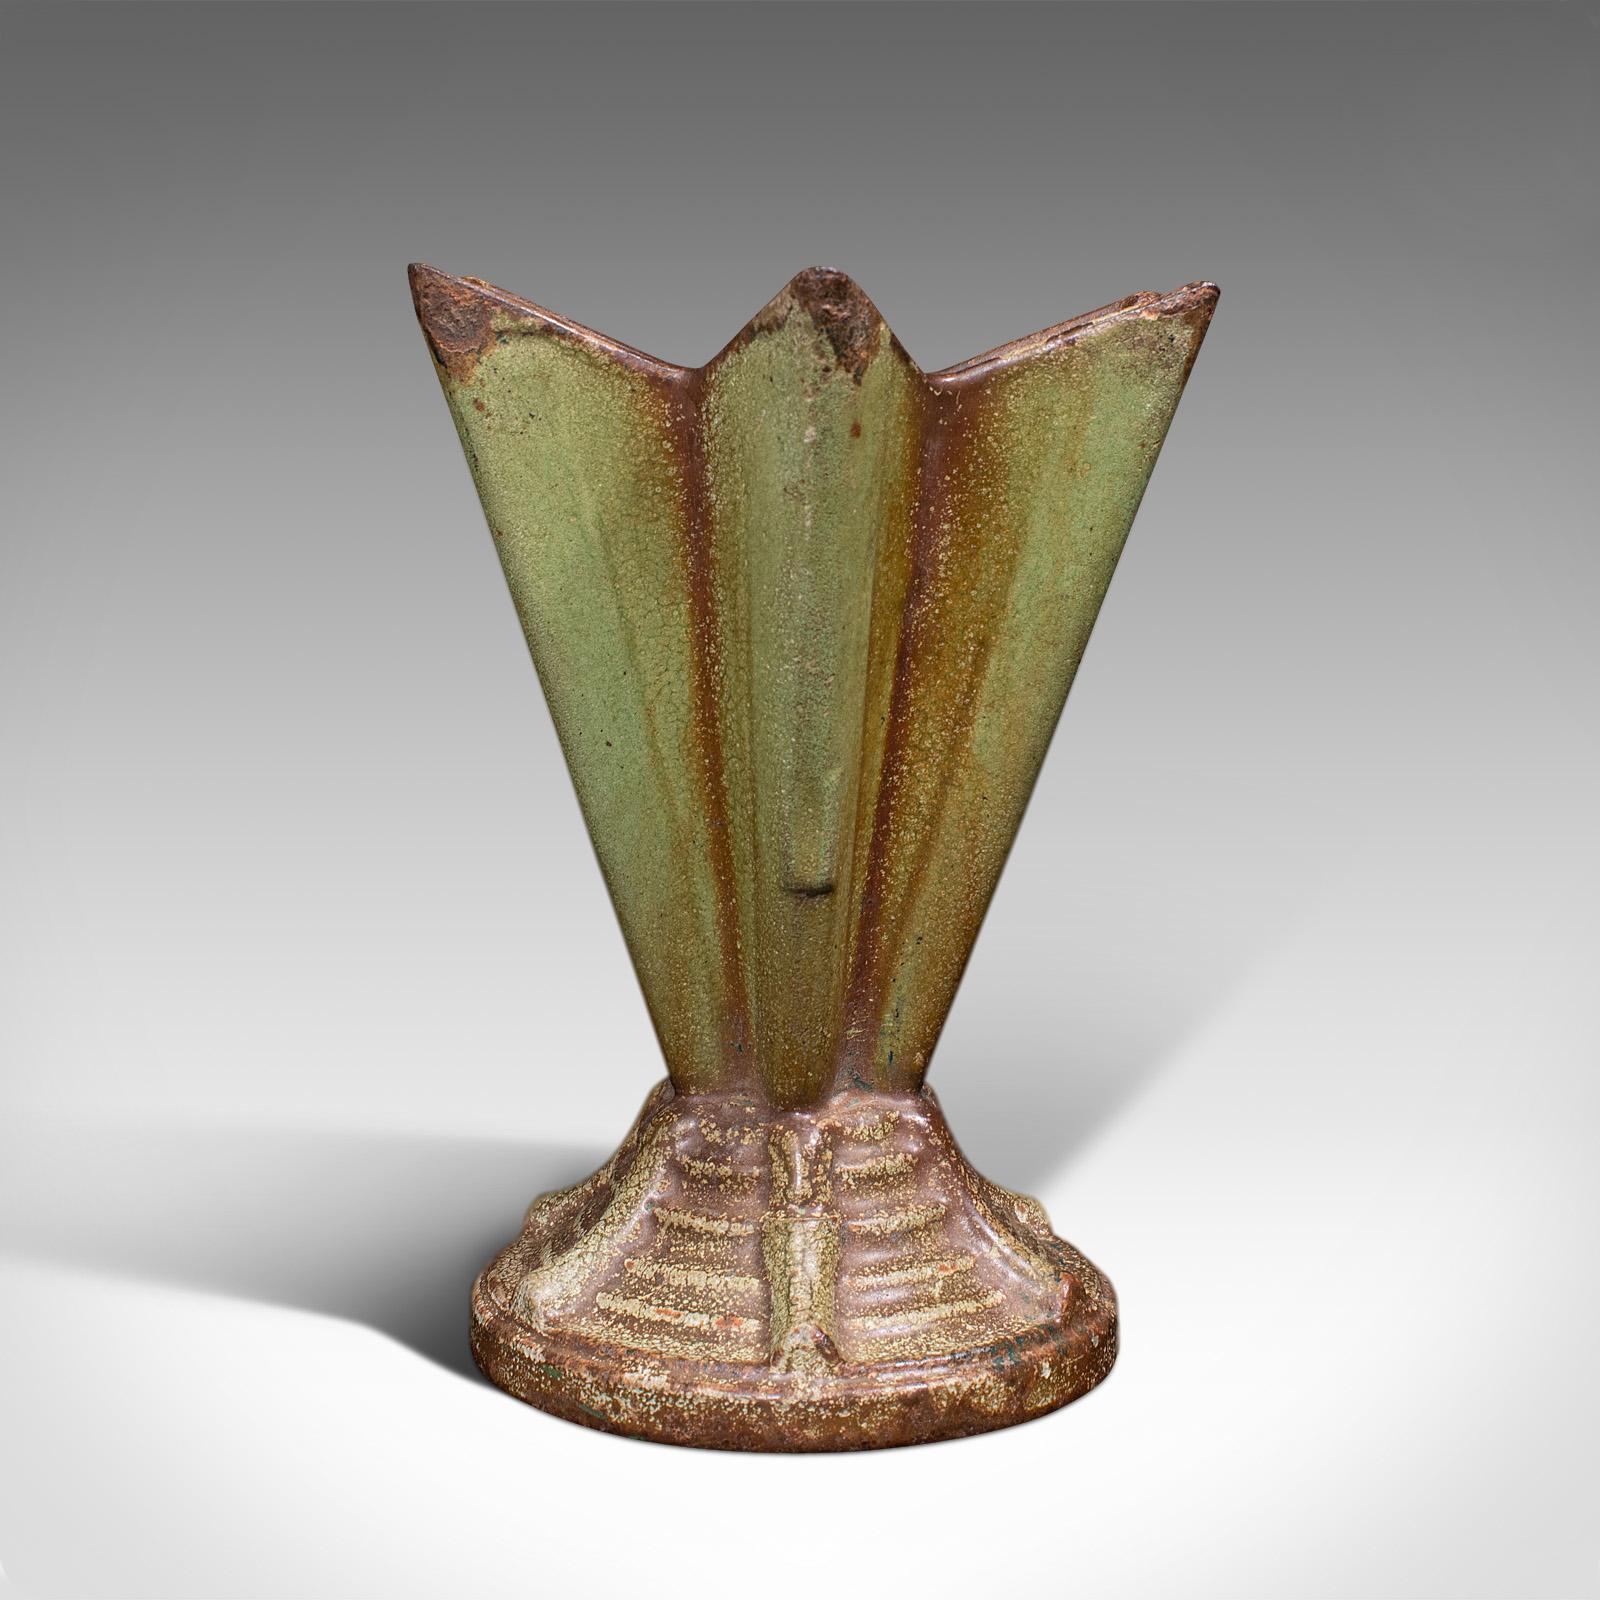 This is a vintage Art Deco display vase. An English, cast iron planter or petite jardiniere, dating to the early 20th century, circa 1930.

Distinguished vase with six-pointed star form
Displays a desirable aged patina throughout
Graced with its